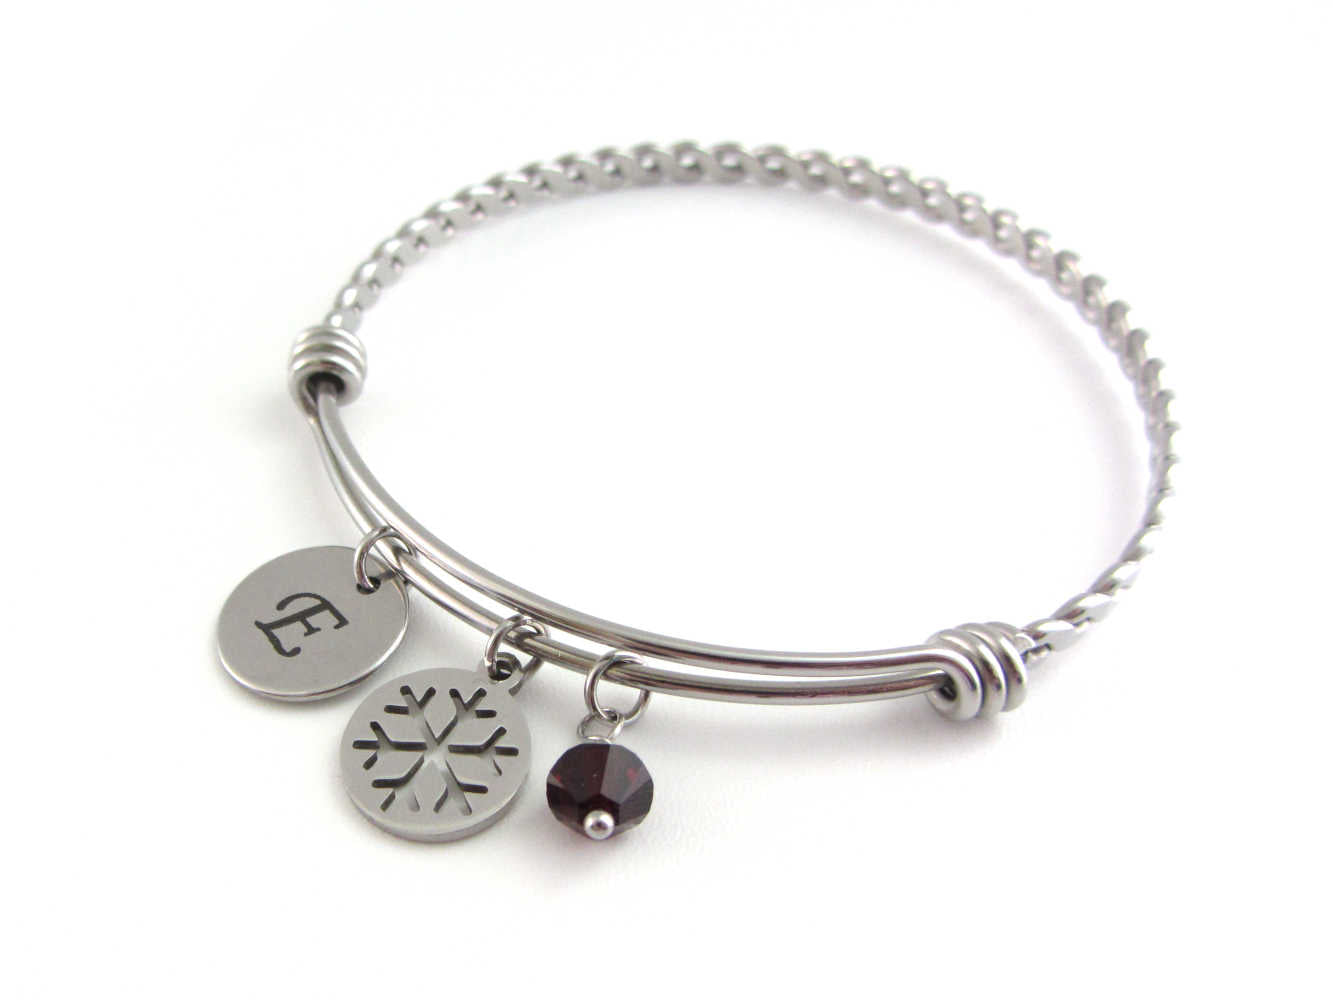 laser engraved capital initial letter disc charm, snowflake charm and a red crystal charm on a bangle with braided twist pattern